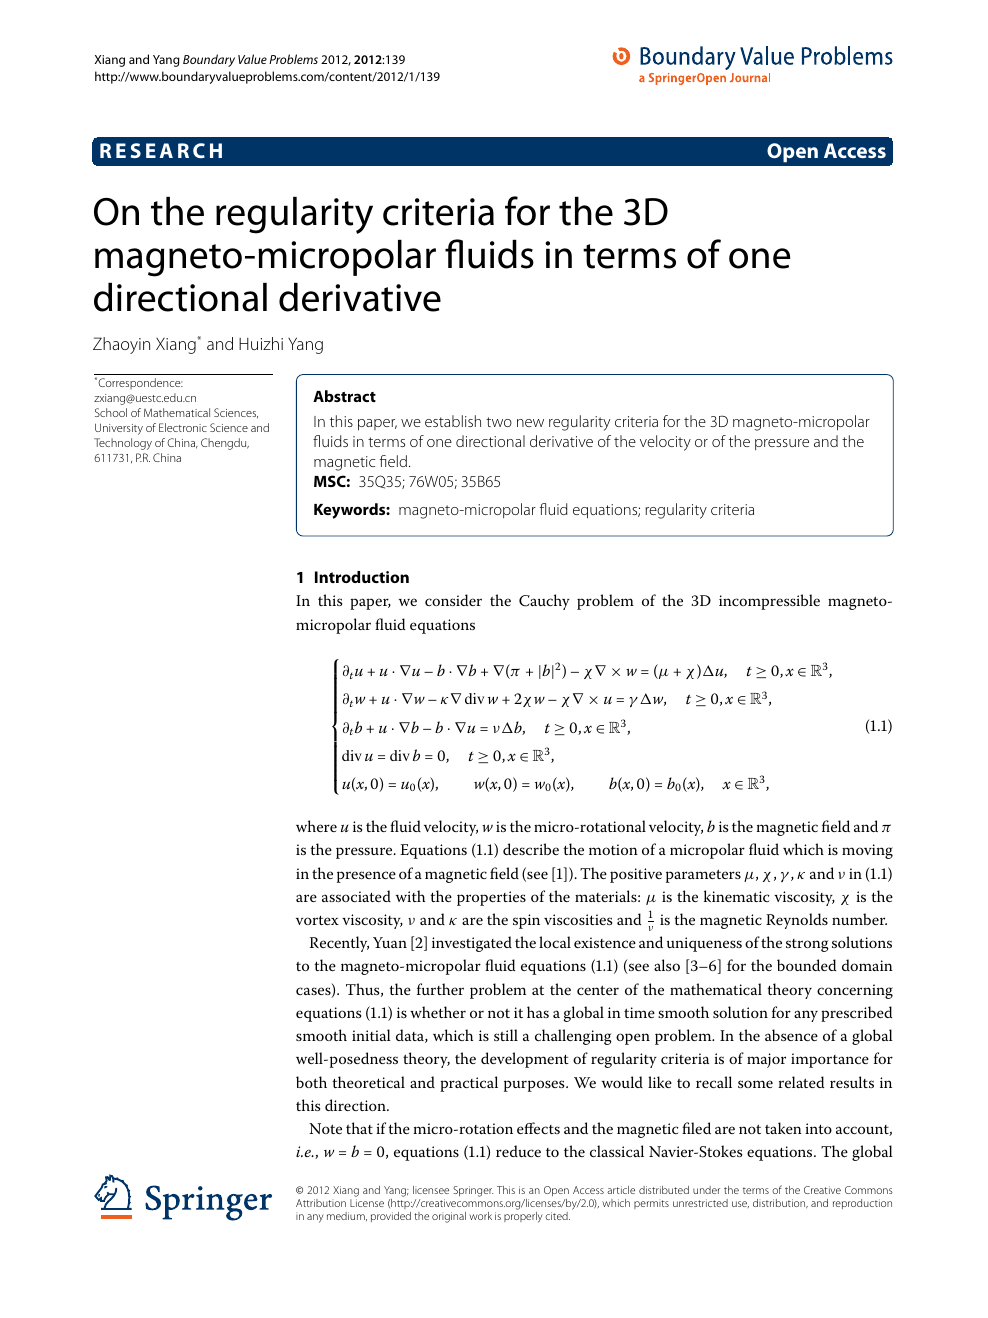 On The Regularity Criteria For The 3d Magneto Micropolar Fluids In Terms Of One Directional Derivative Topic Of Research Paper In Mathematics Download Scholarly Article Pdf And Read For Free On Cyberleninka